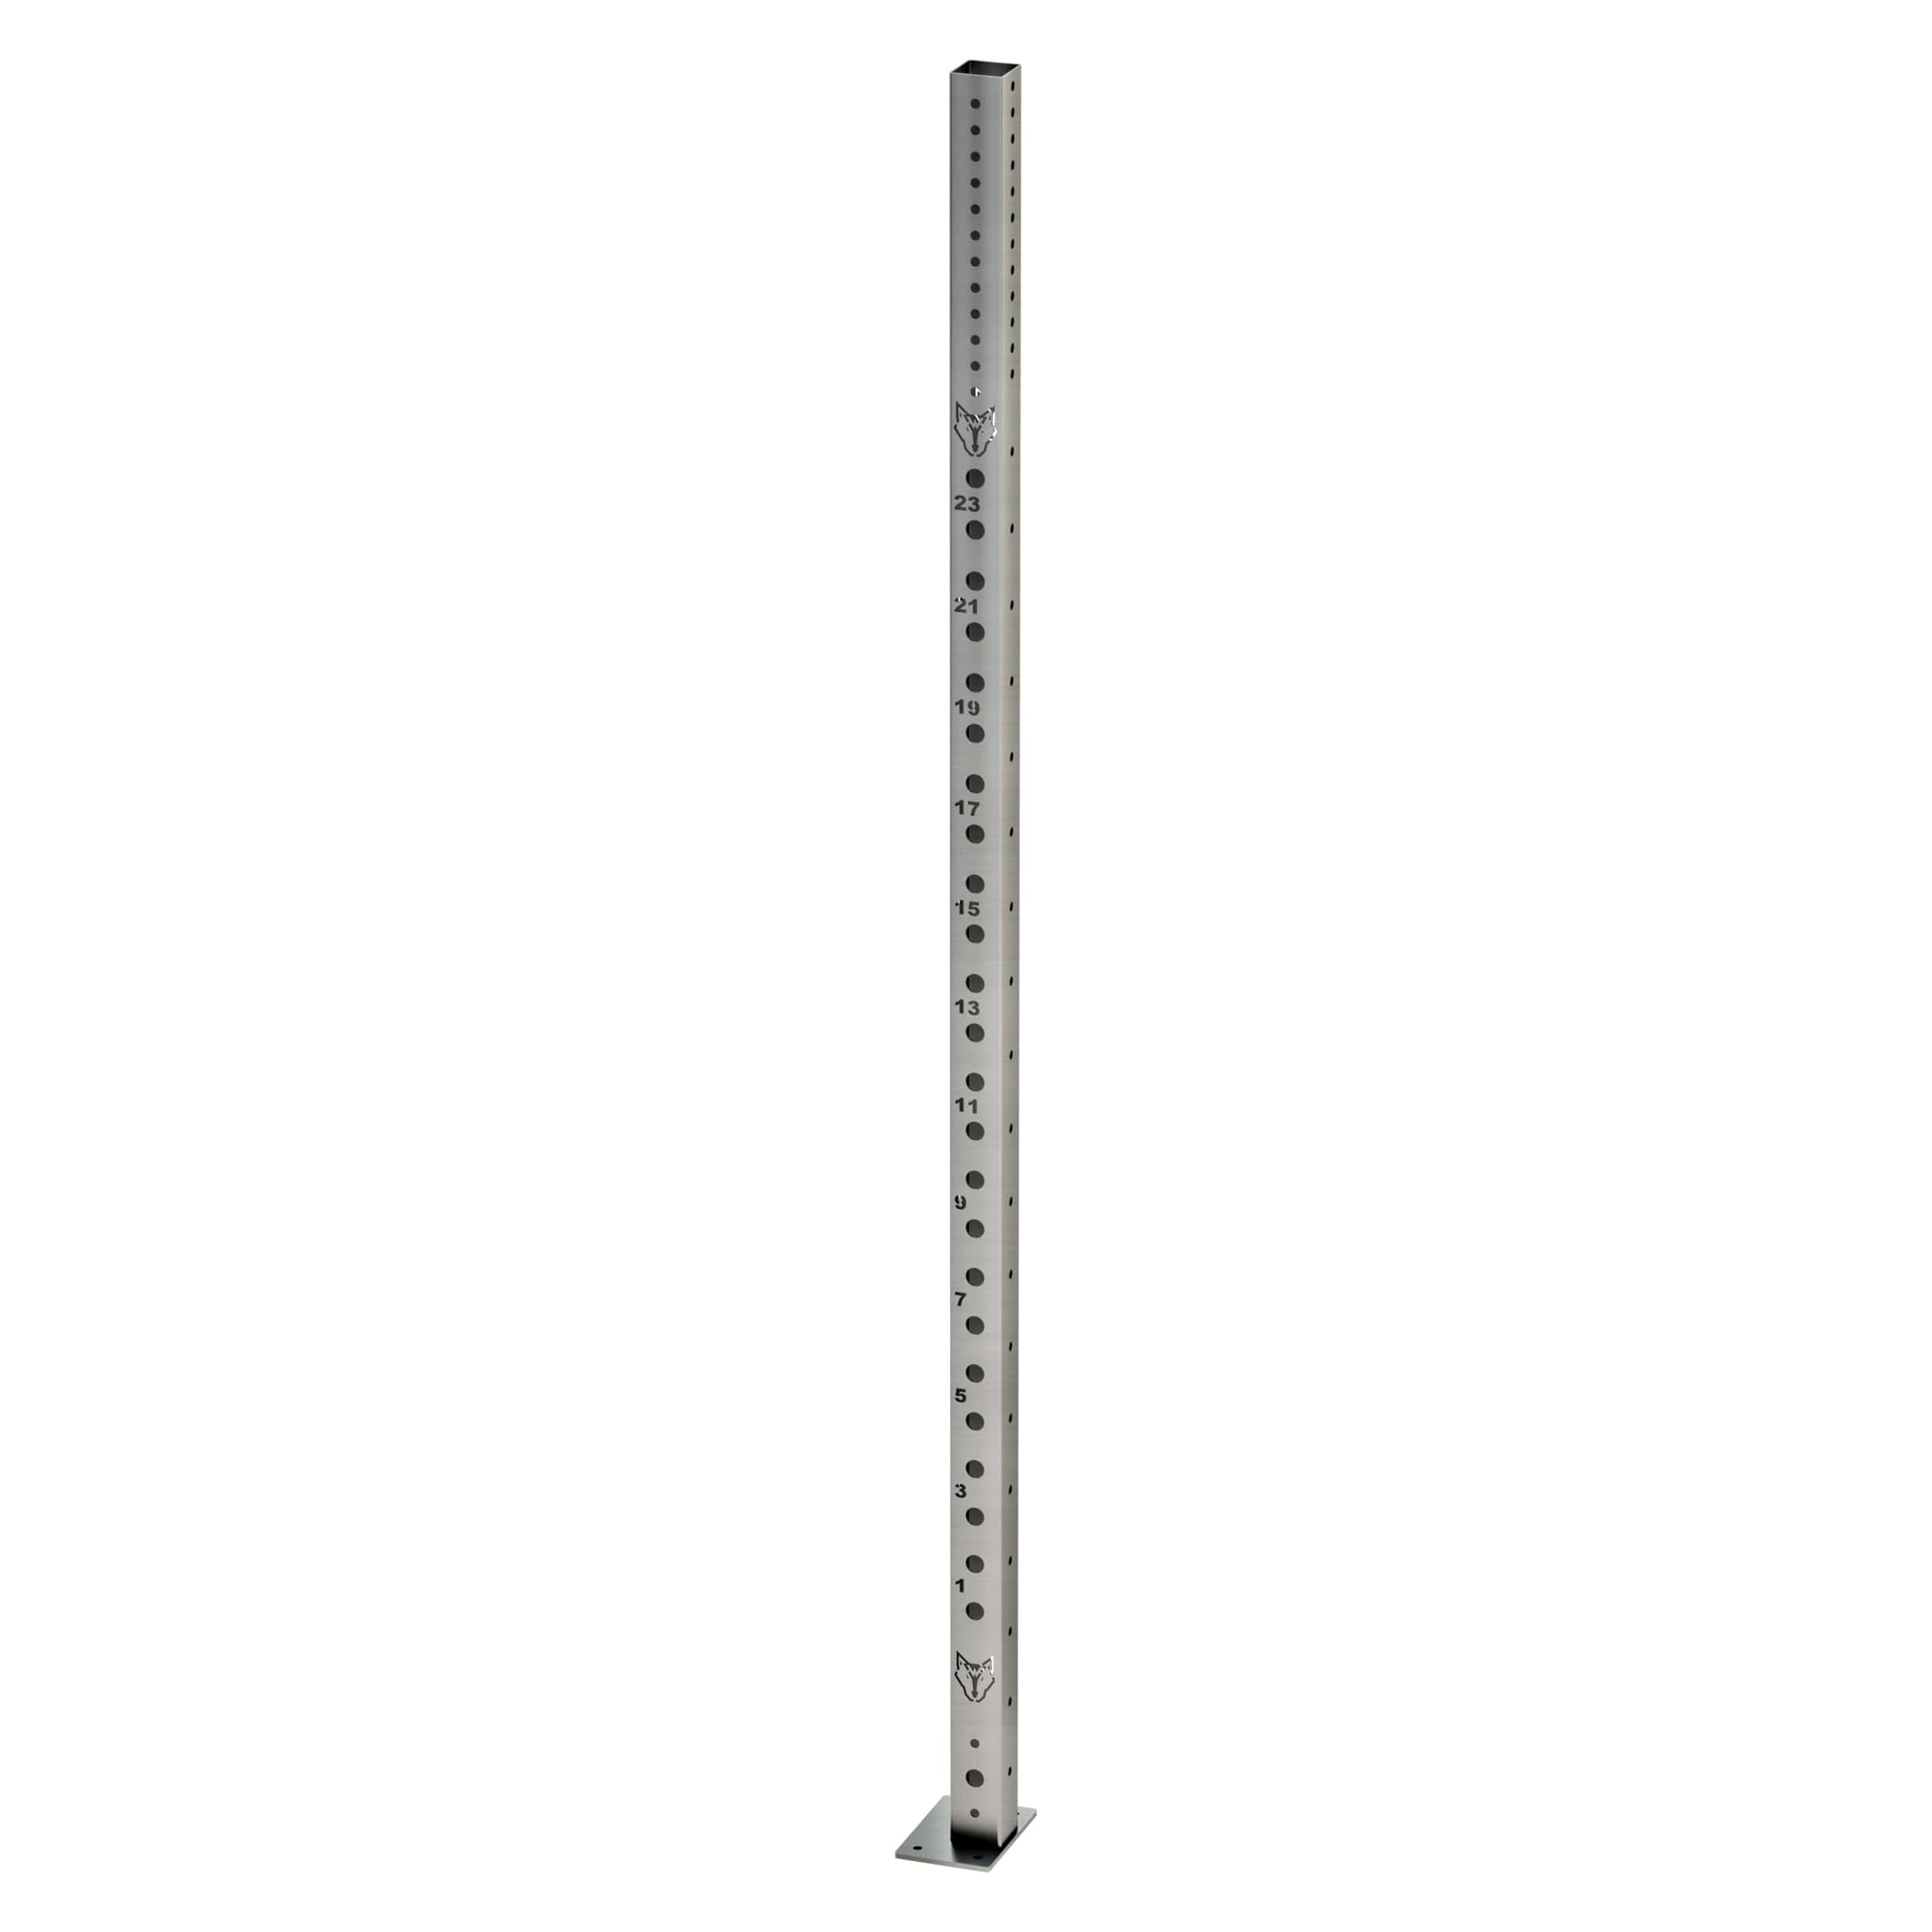 Bison Series - Stainless Steel 2.5m Upright